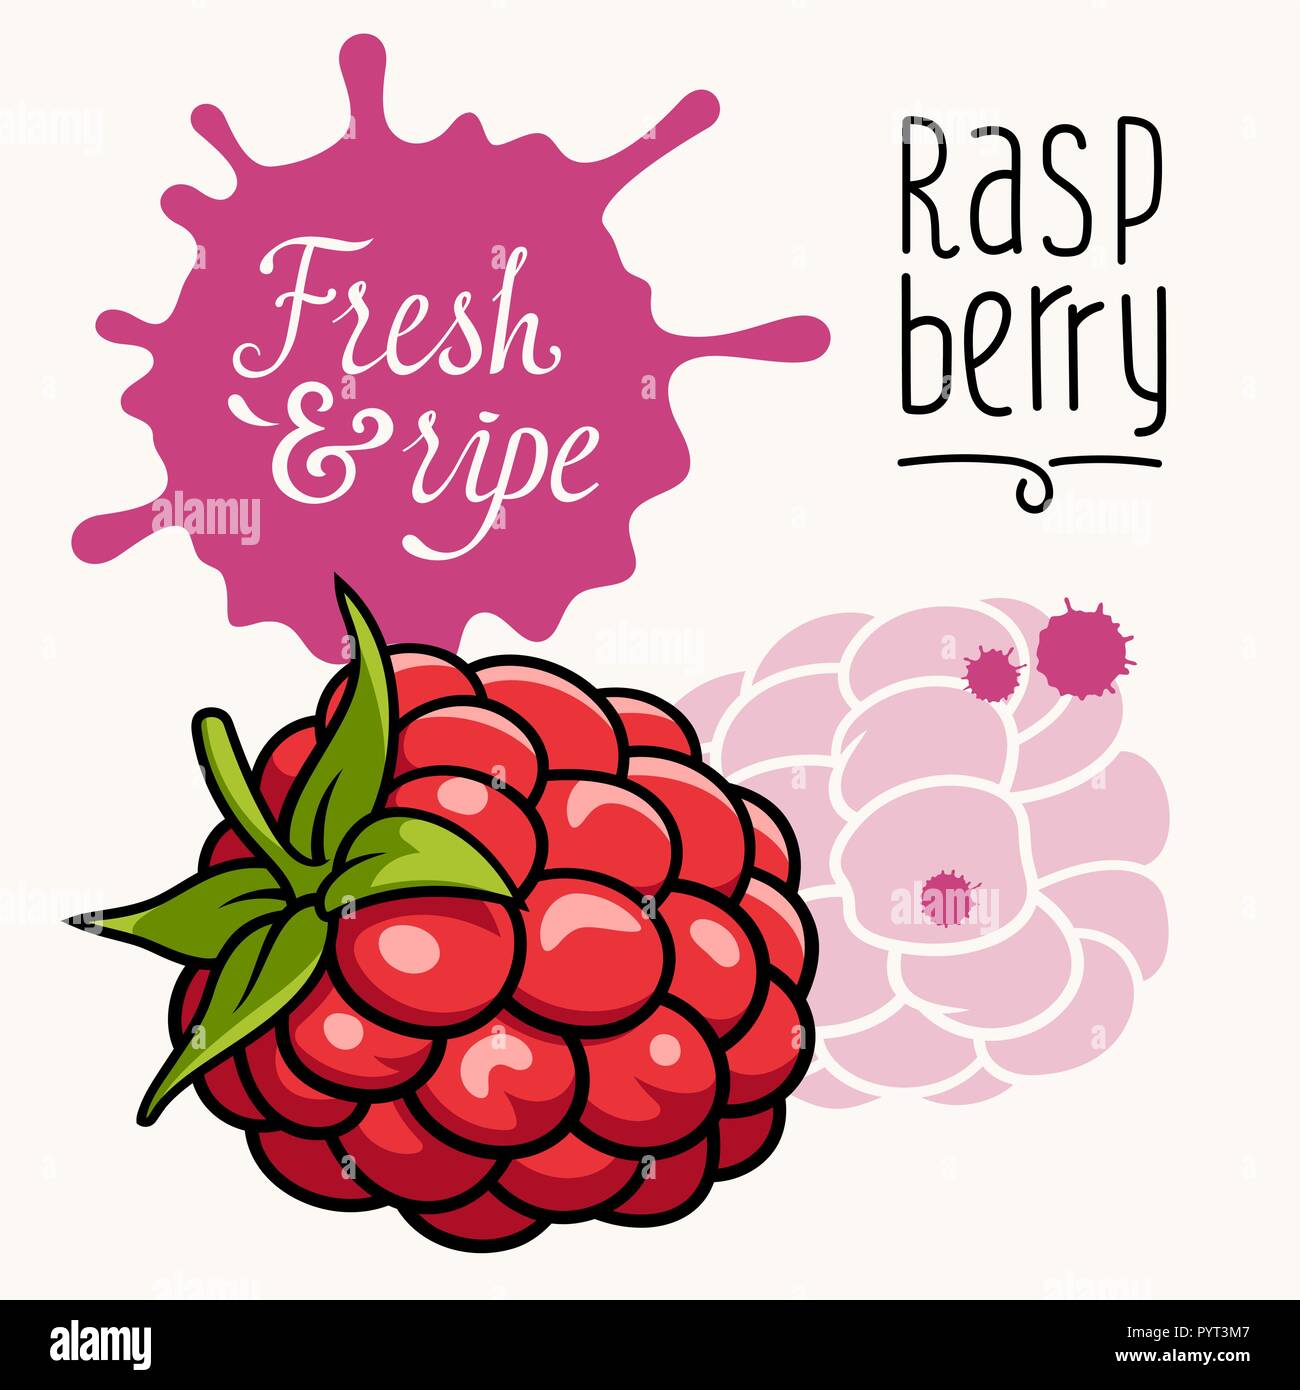 Vector illustration of ripe juicy raspberry. Concept for the Farmers market. Idea for the label design. Organic, local grown products Stock Vector